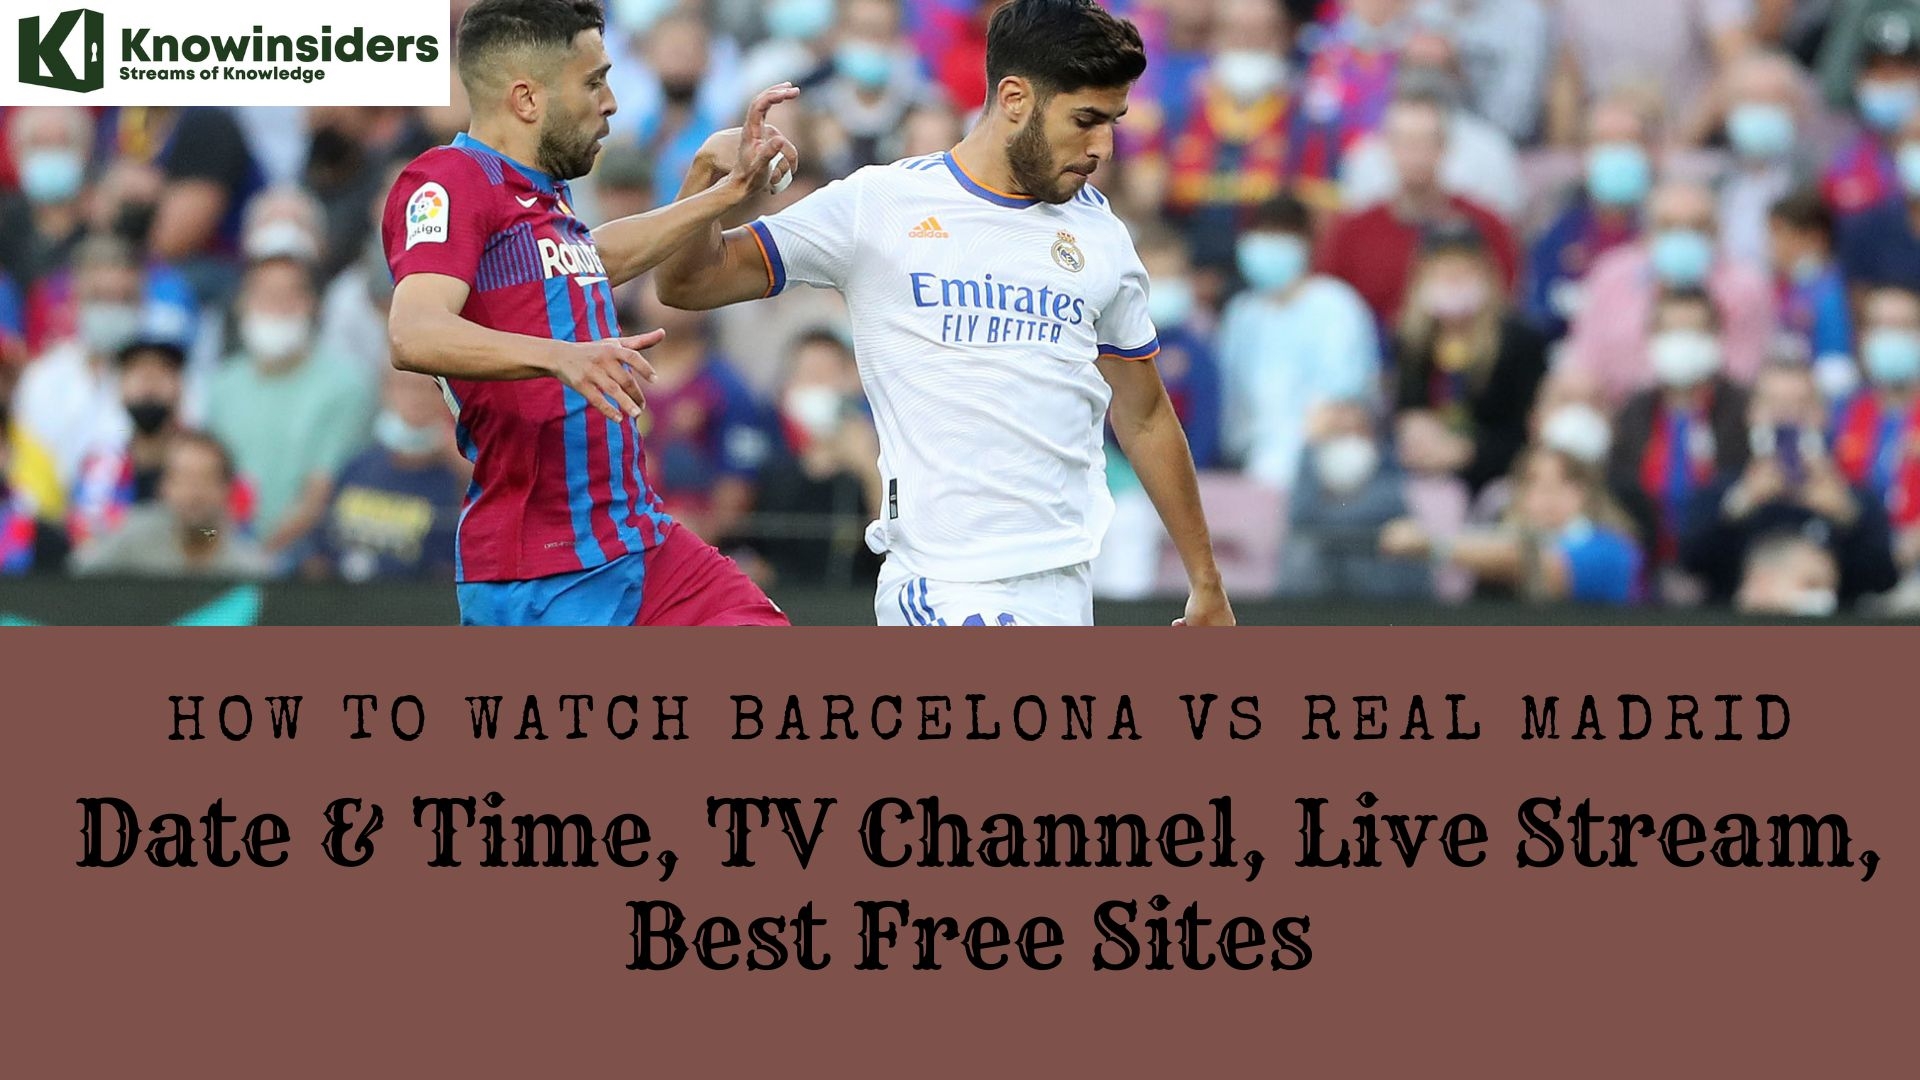 How To Watch Barcelona vs Real Madrid: Best Free Sites, TV Channel, Live Stream